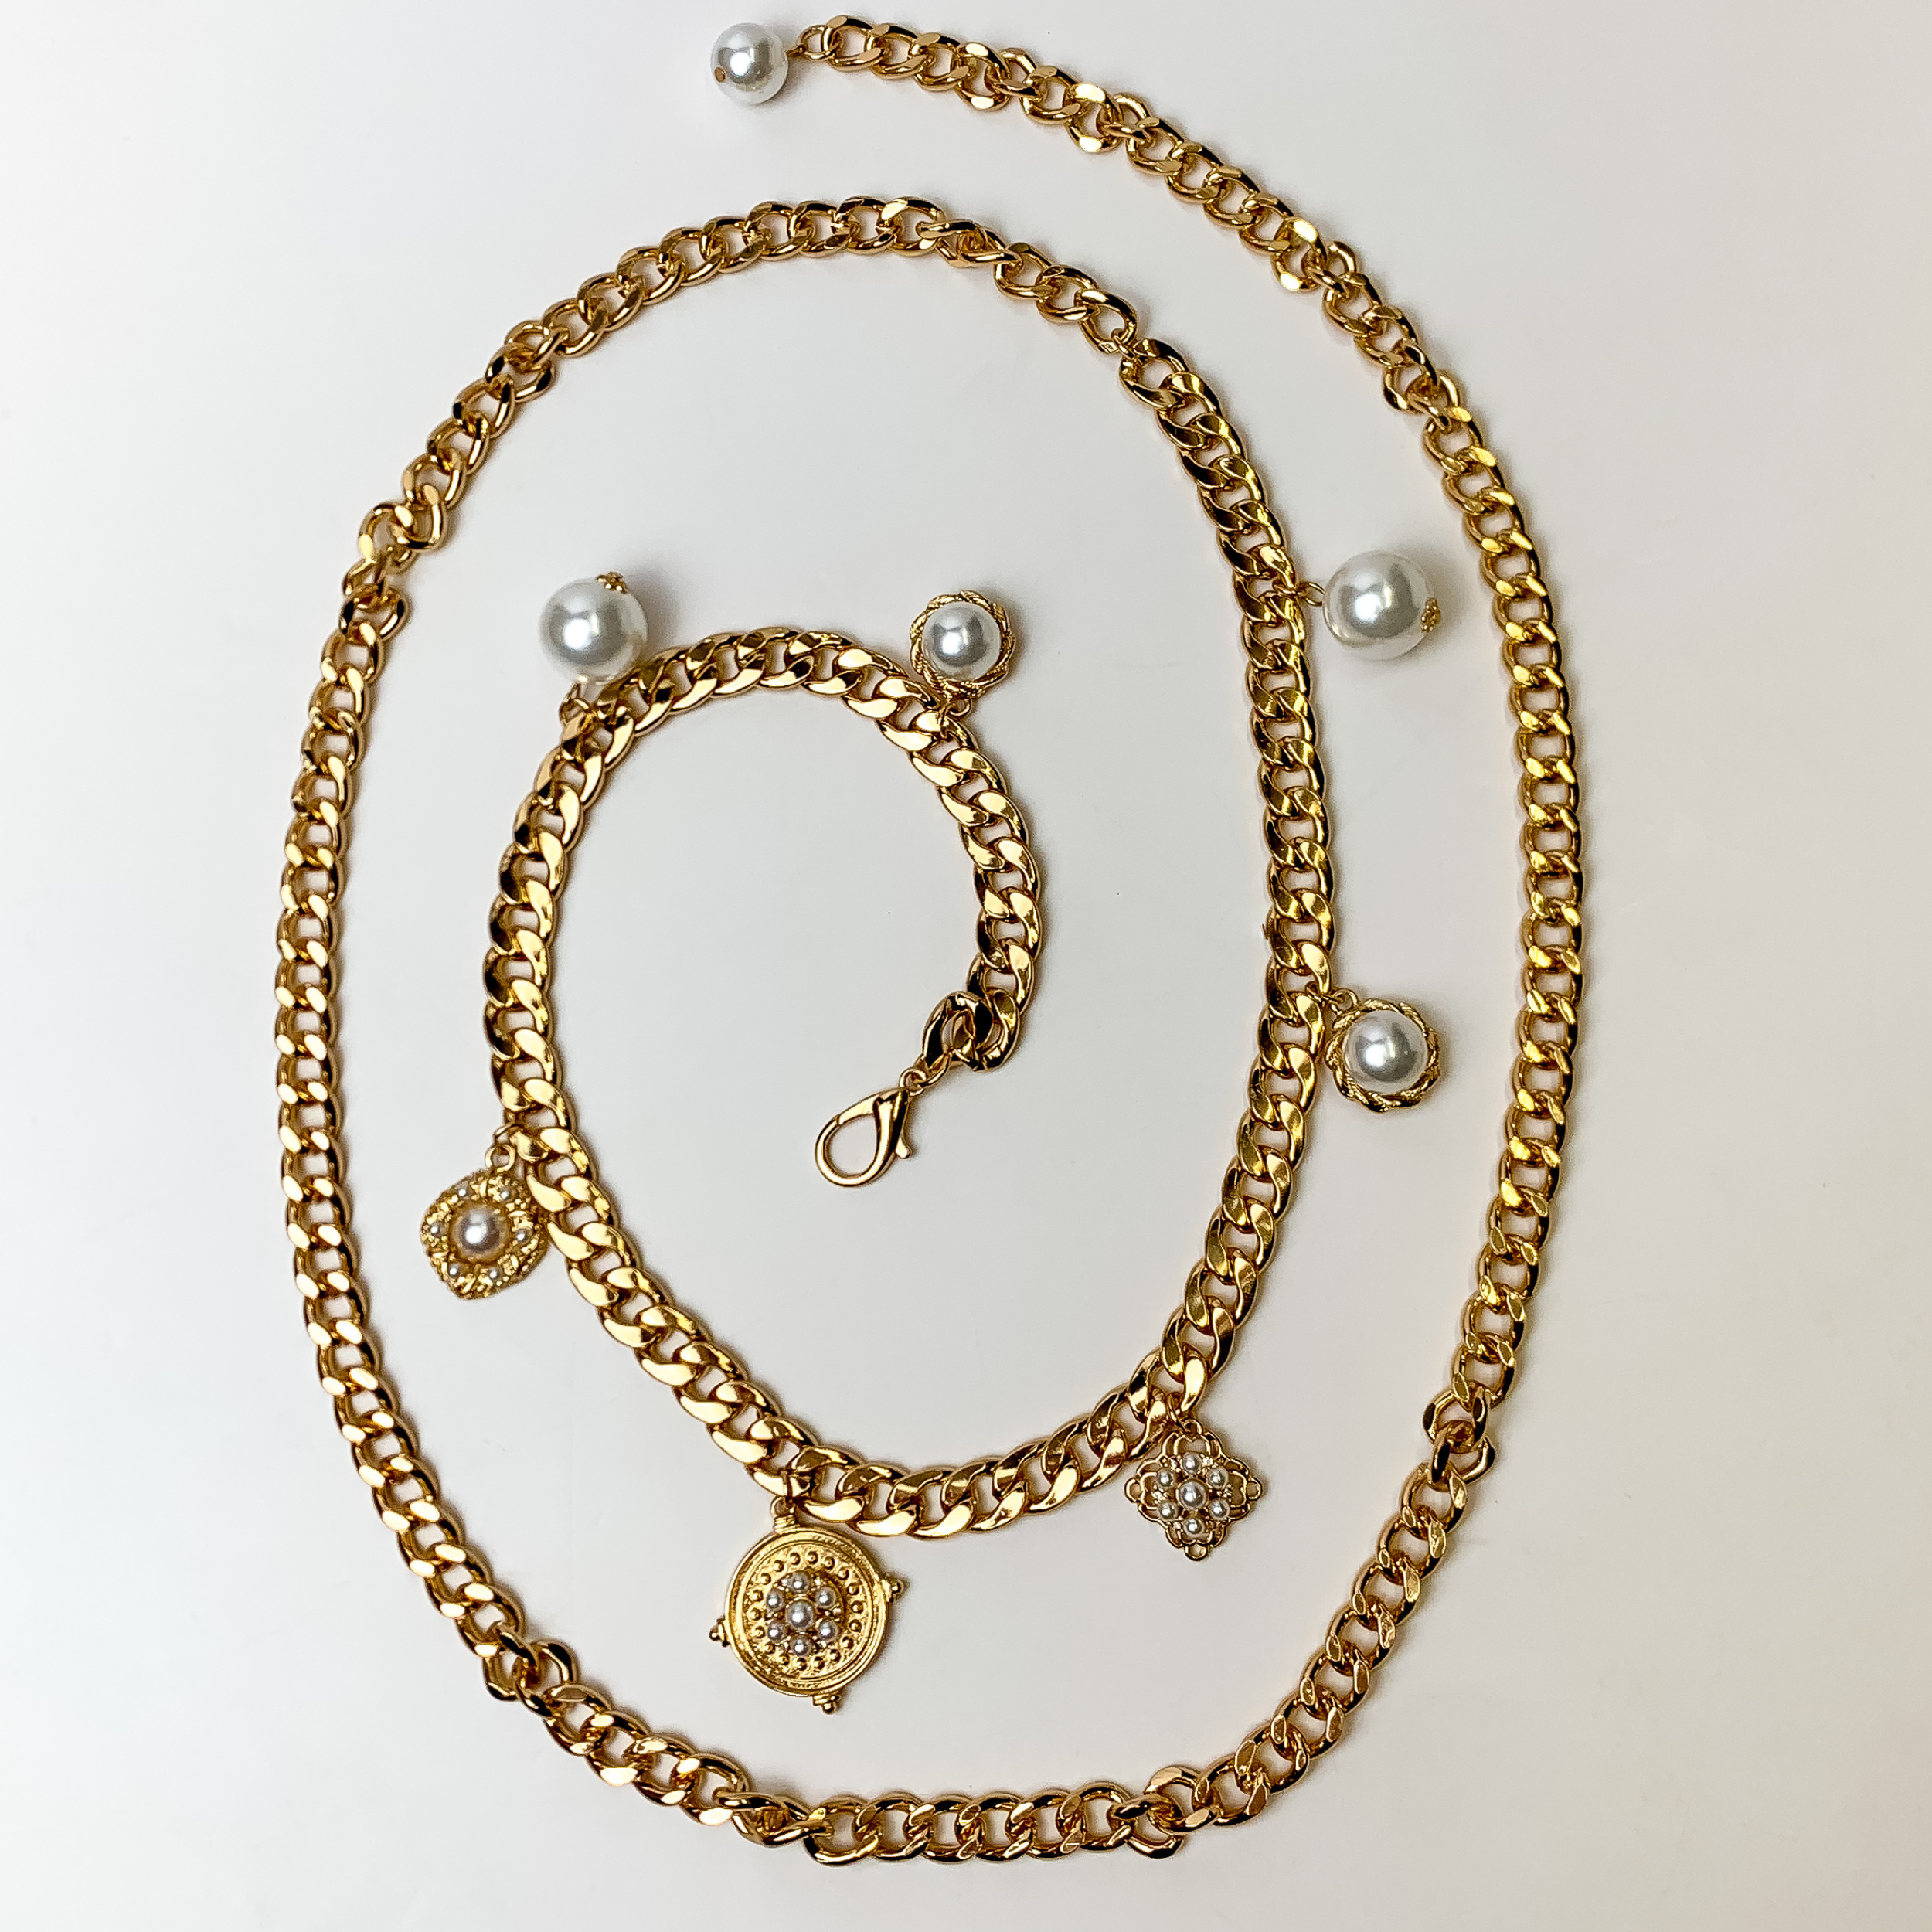 This Eccentric Gold Tone Belt with Pearls and Pendants is pictured on a white background.